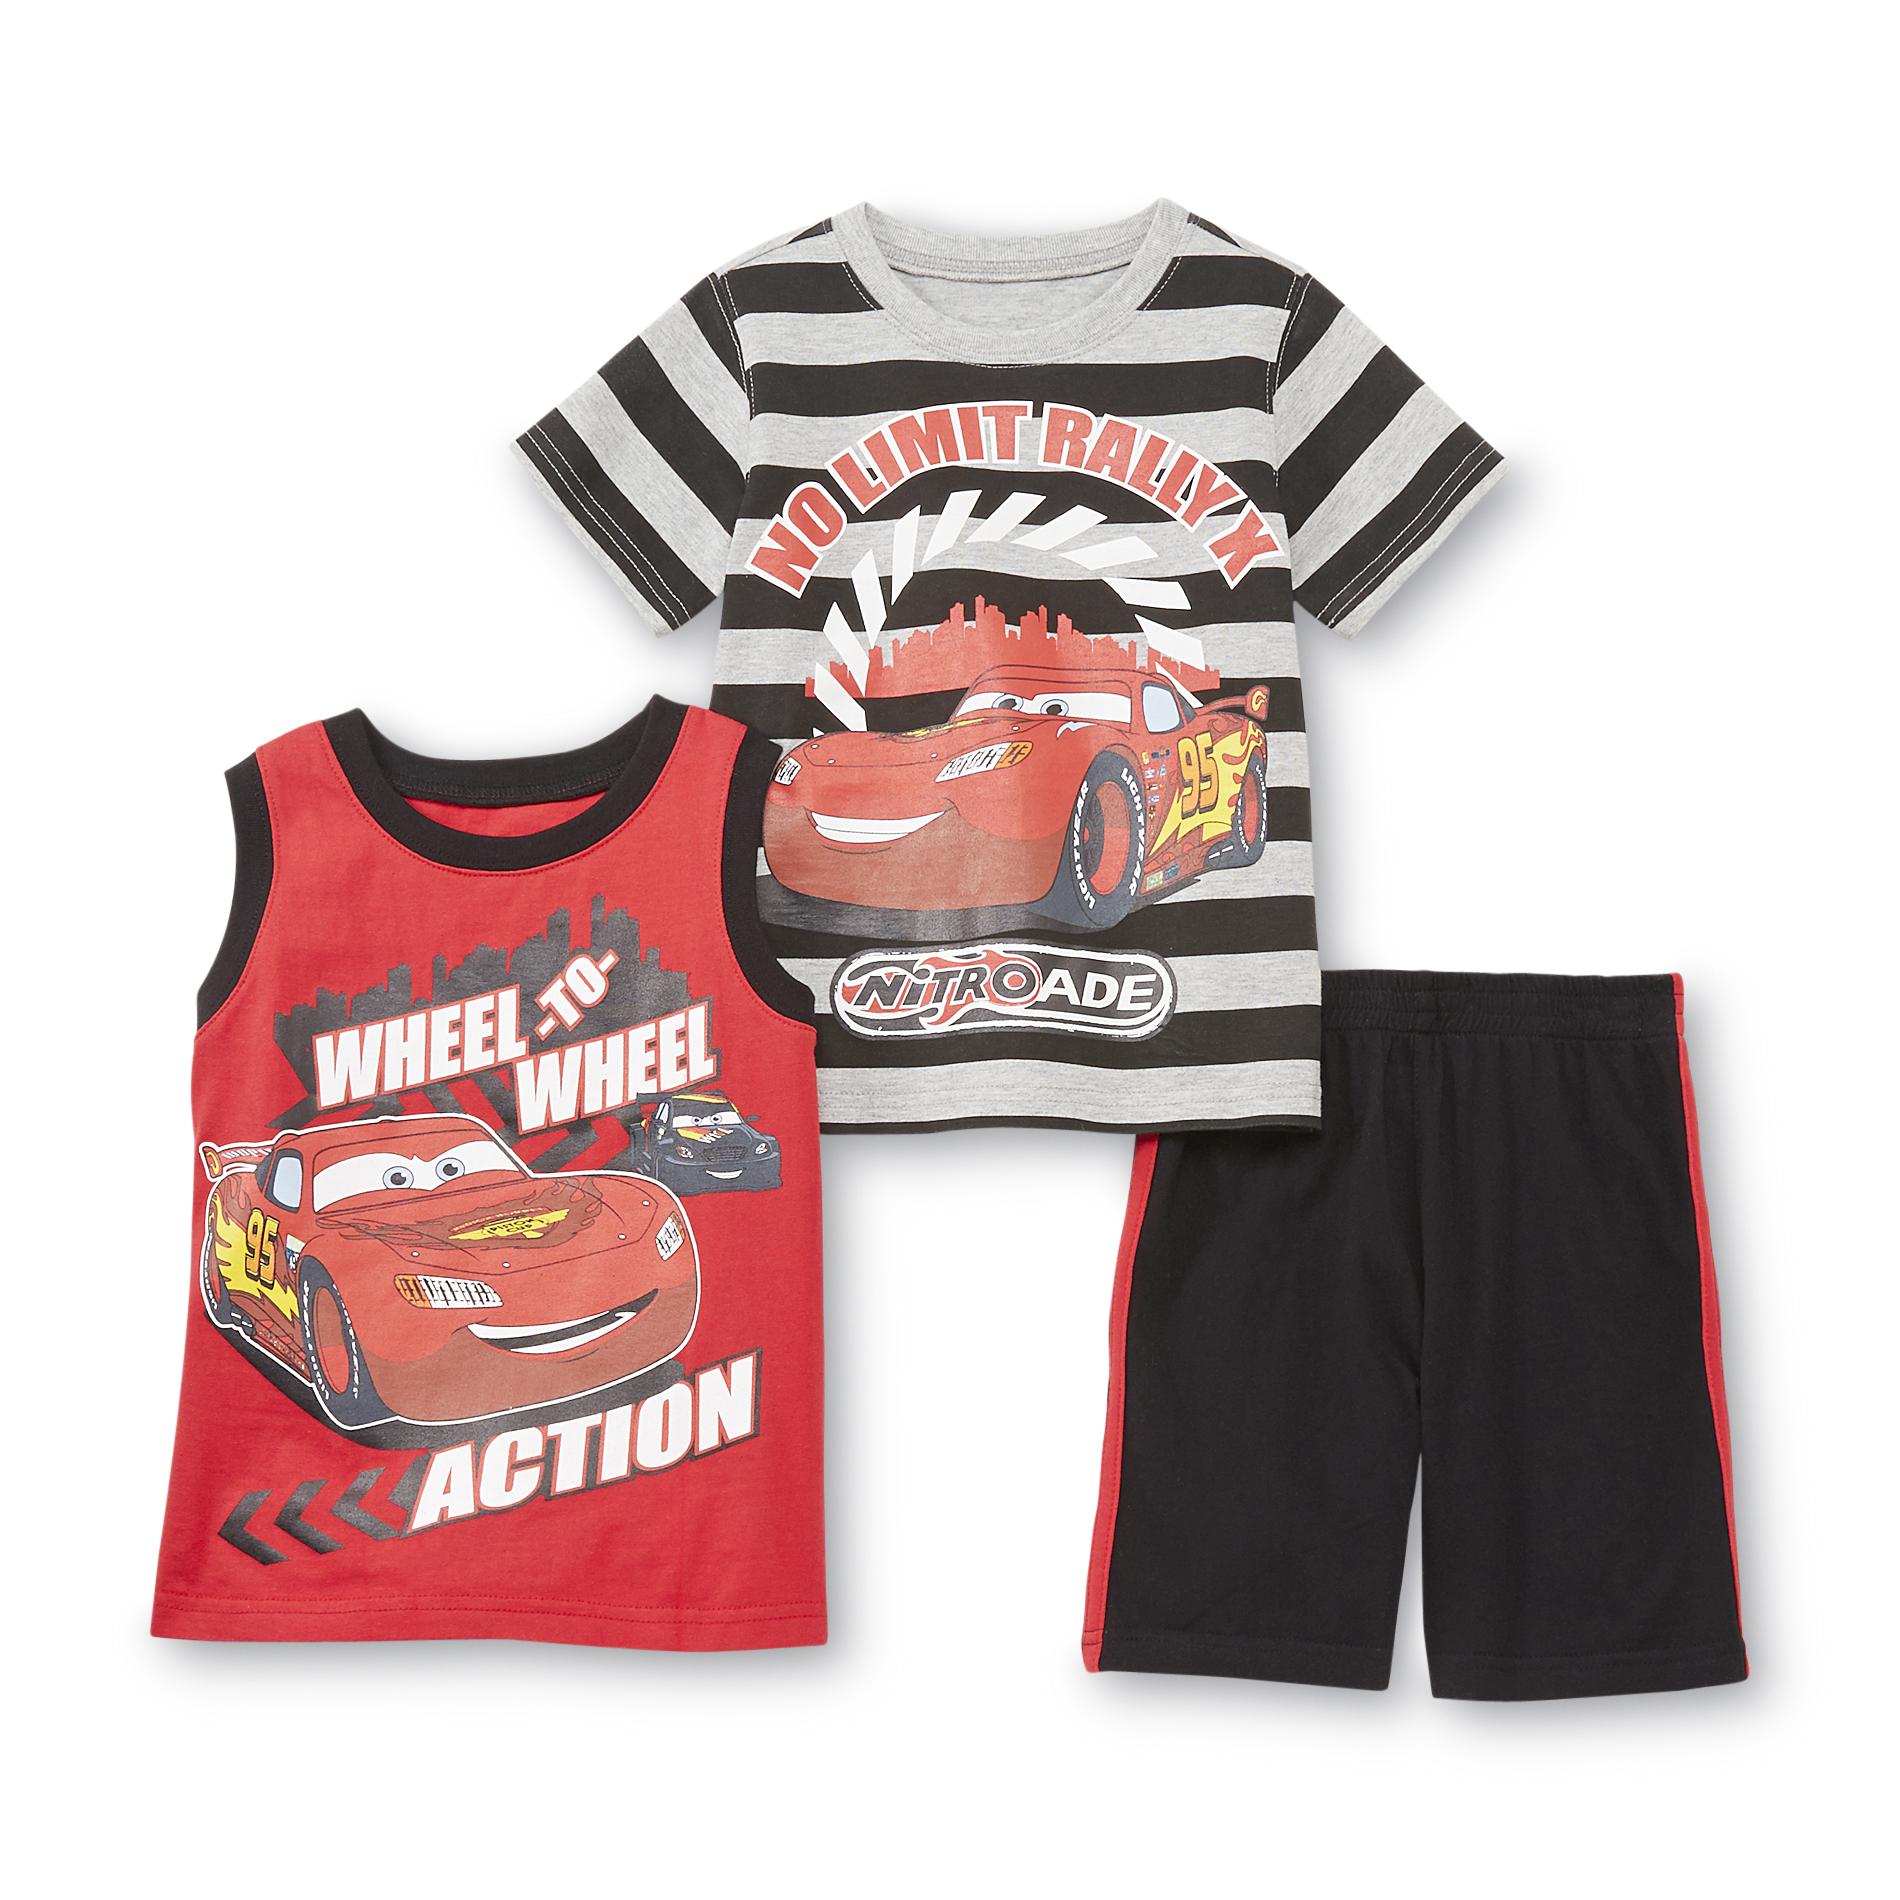 Disney Cars Infant & Toddler Boy's Graphic T-Shirt  Muscle Shirt & Shorts